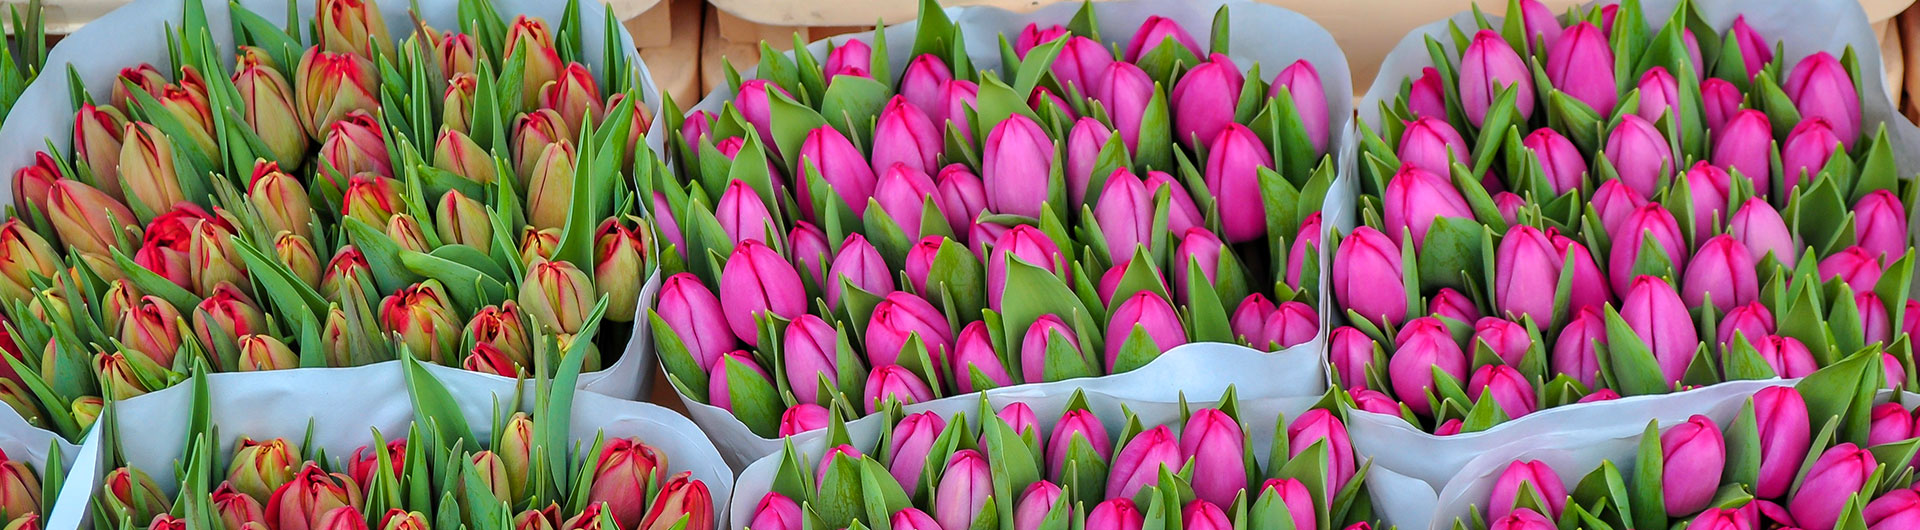 Wholesale Bulb & Flower Distributor for Resellers